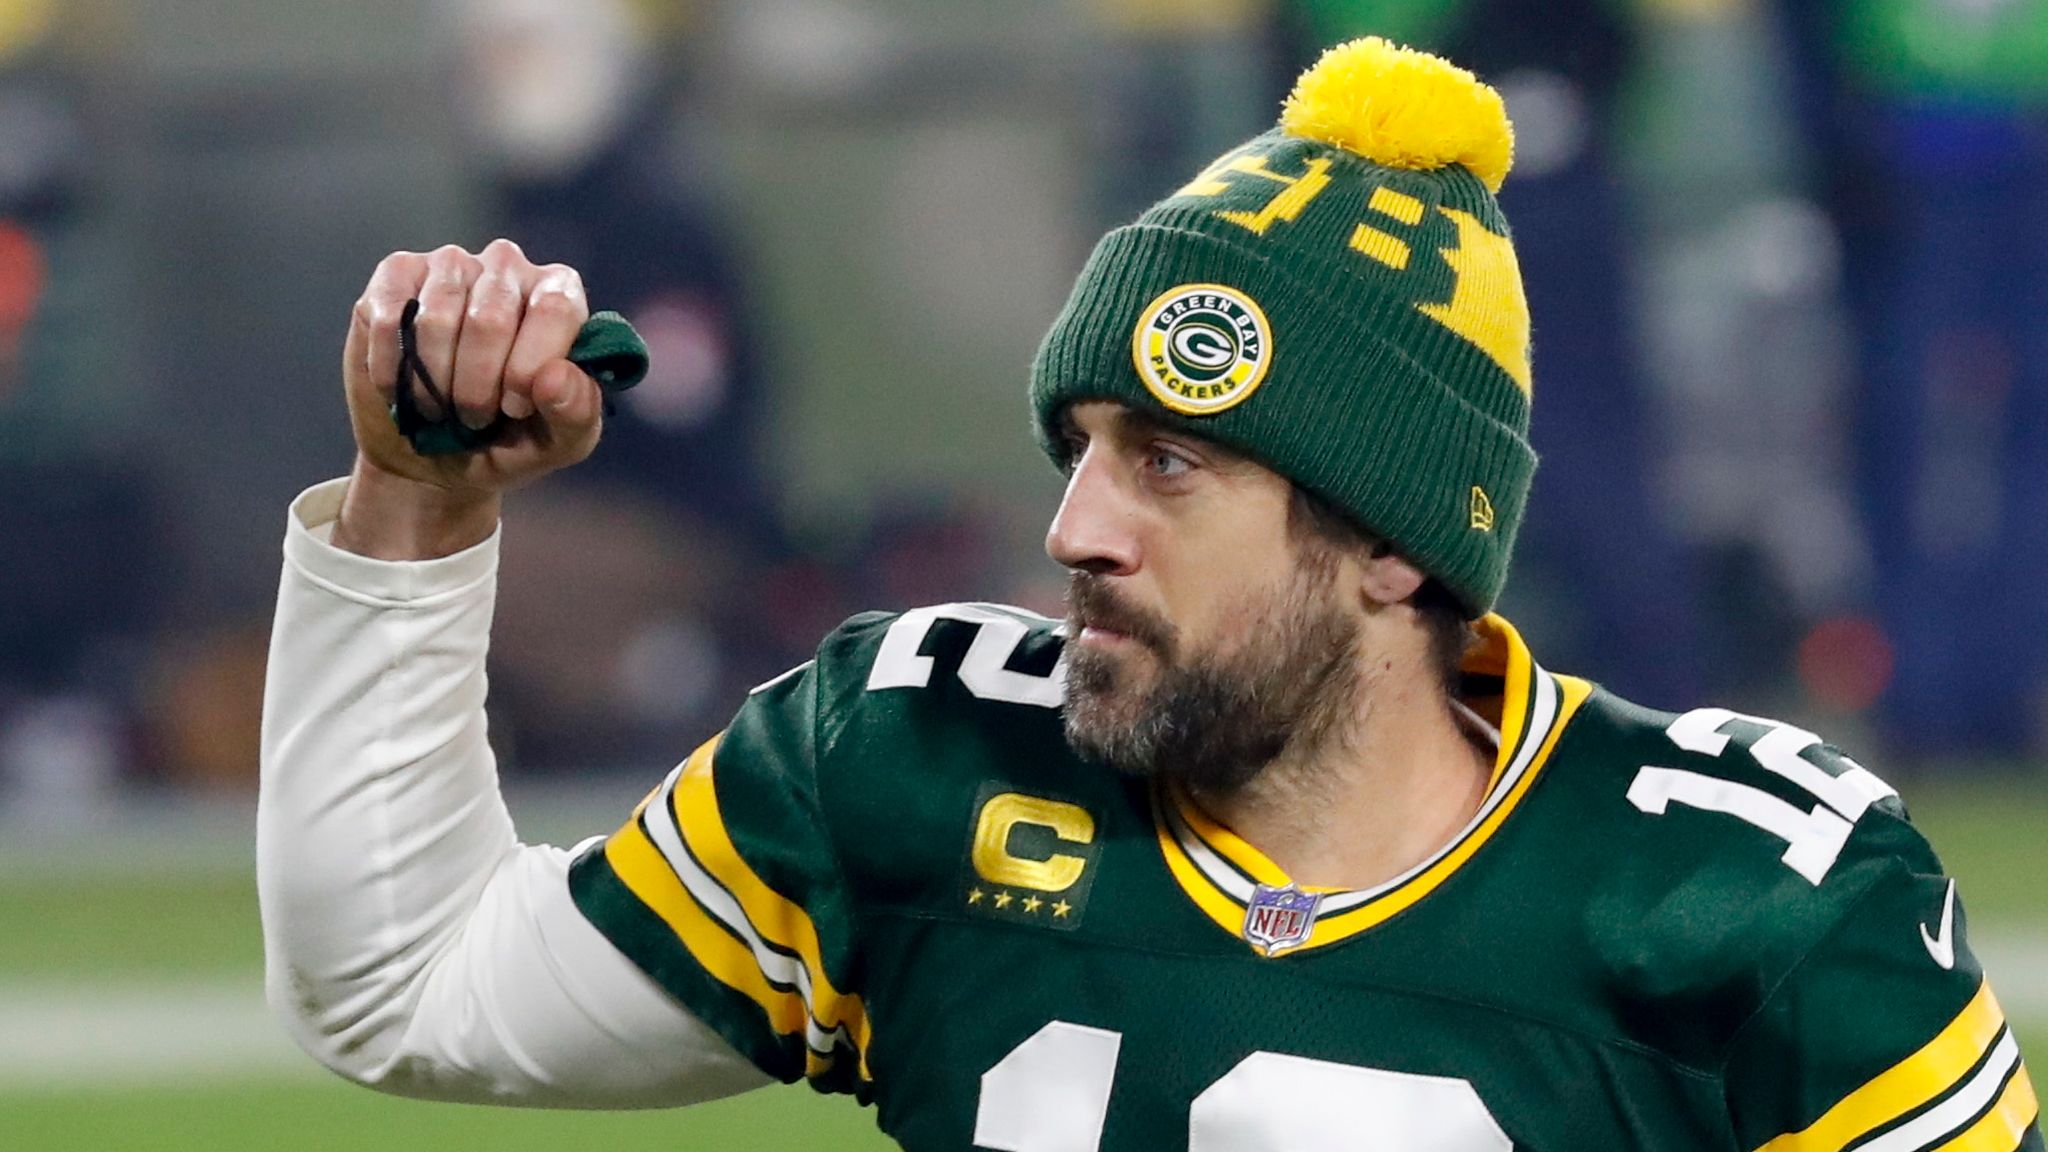 Aaron Rodgers-less Packers have sleeper potential in NFC, while